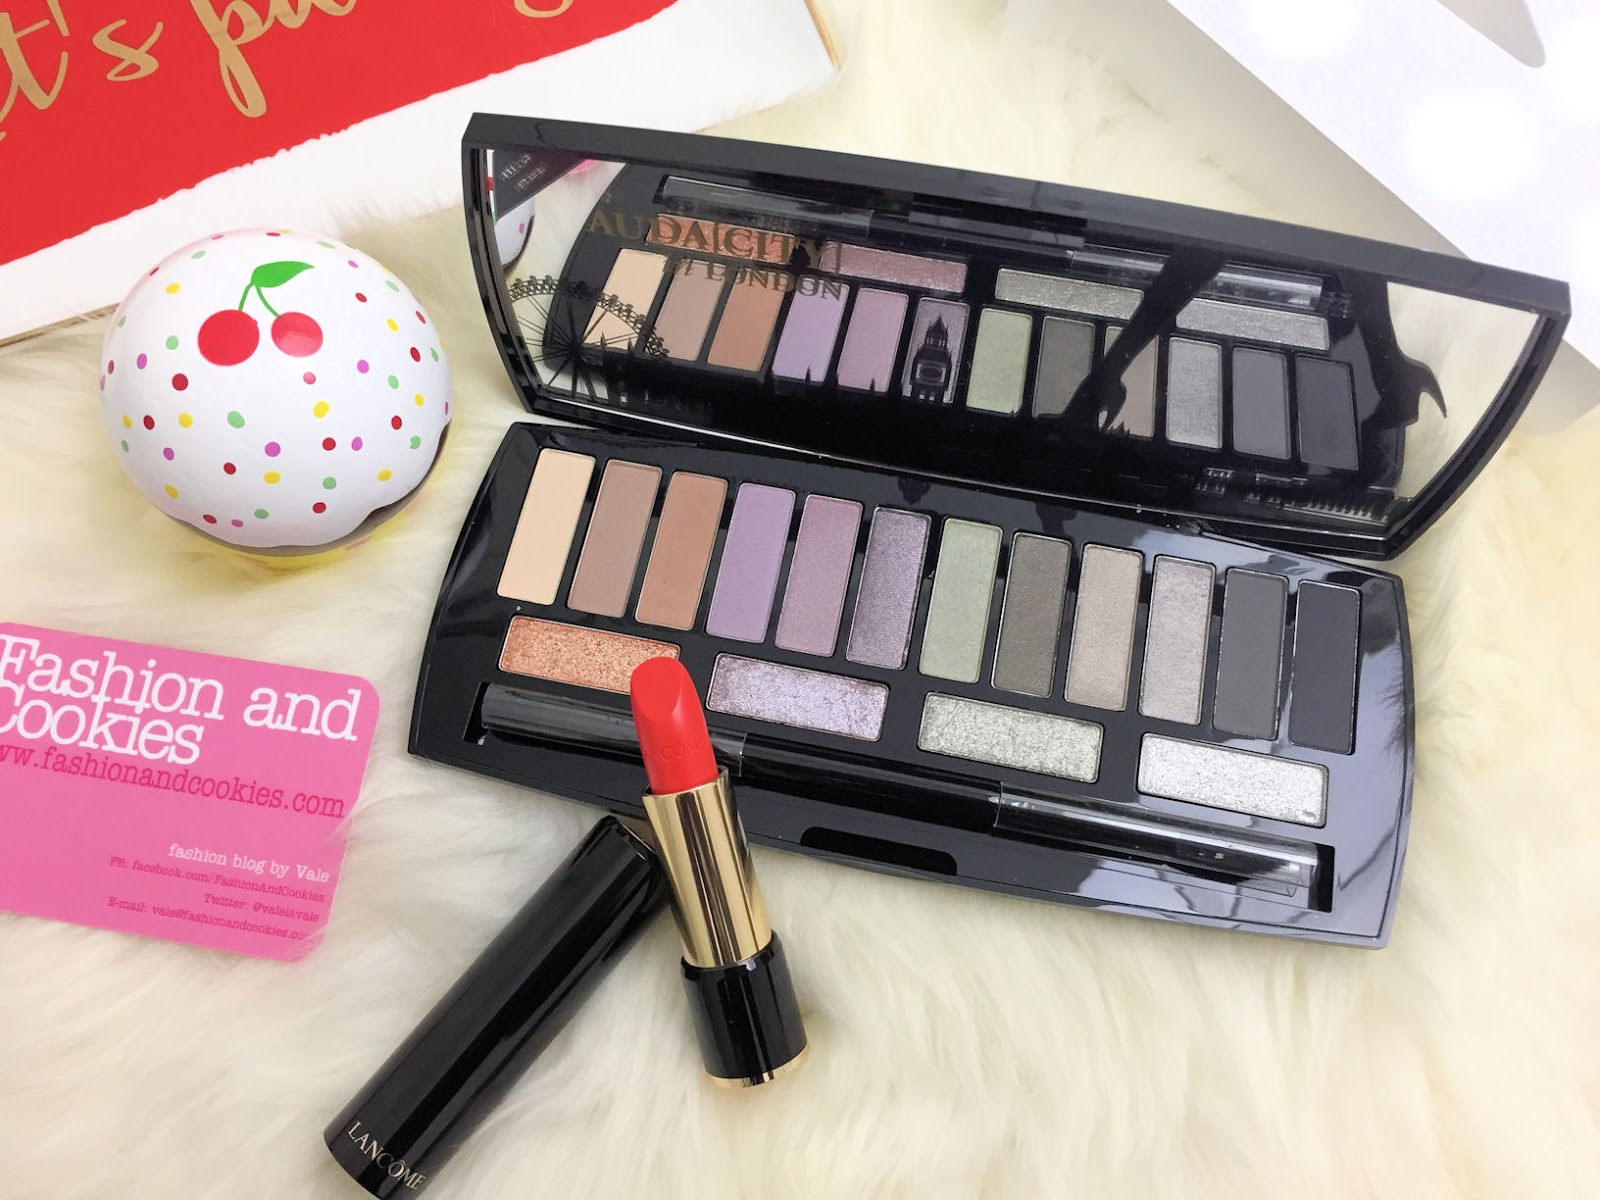 Lancôme Audacity in London palette ombretti recensione on Fashion and Cookies beauty blog, beauty blogger